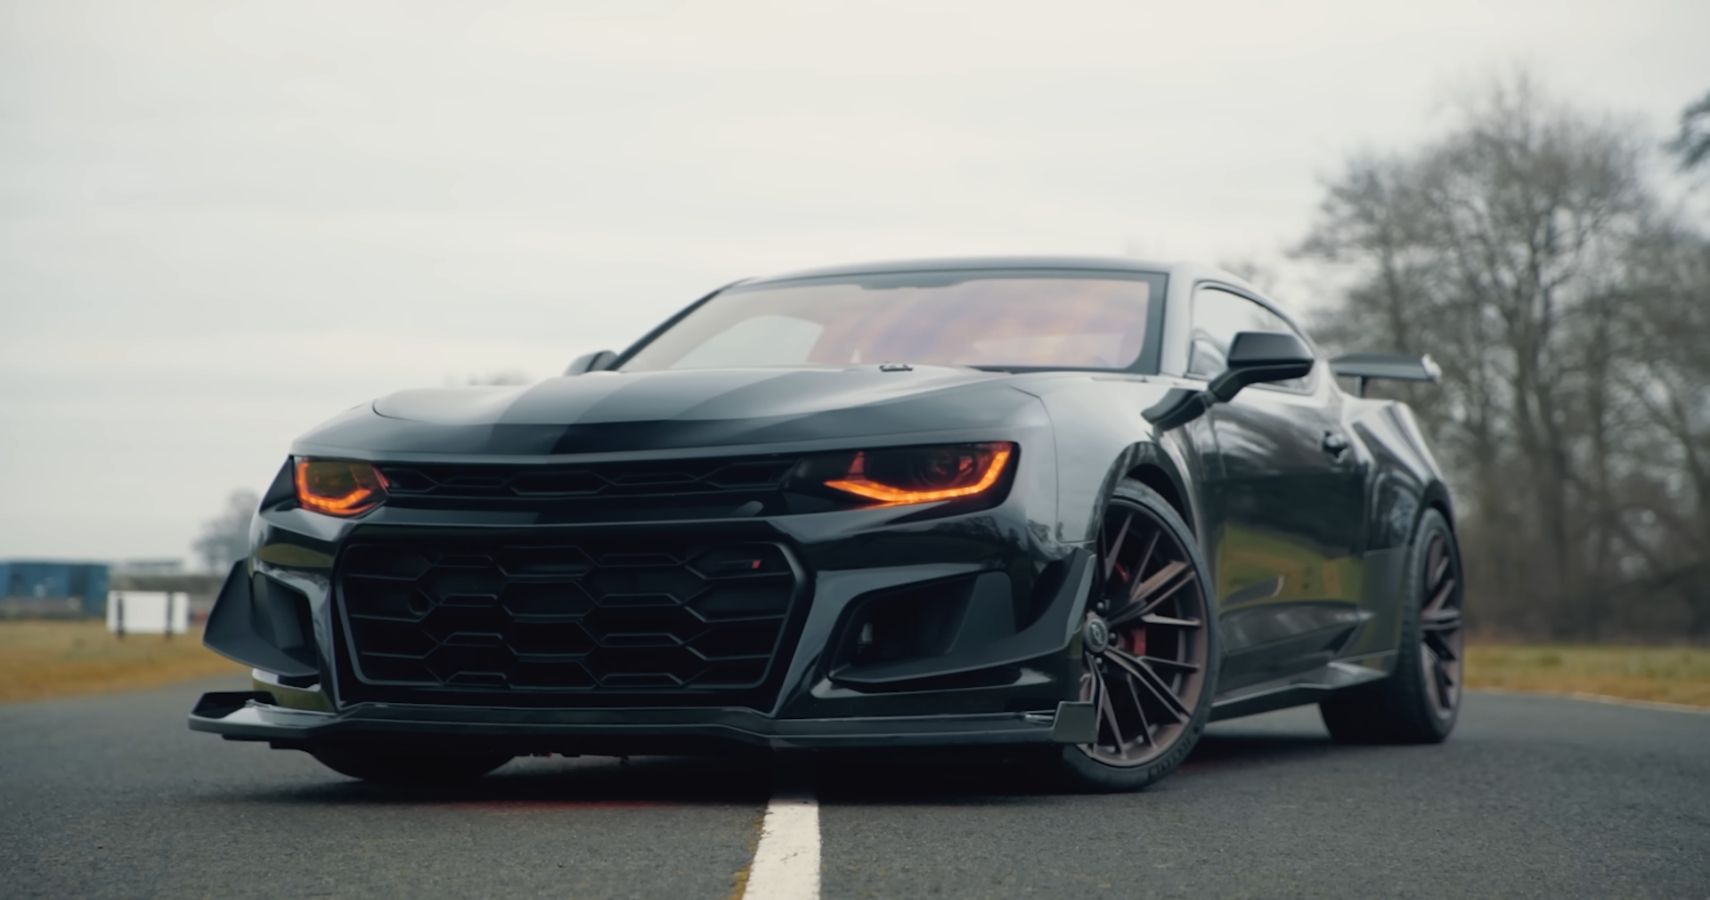 Here's Why The LT4 Motor Of This Chevrolet Camaro ZL1 Is An